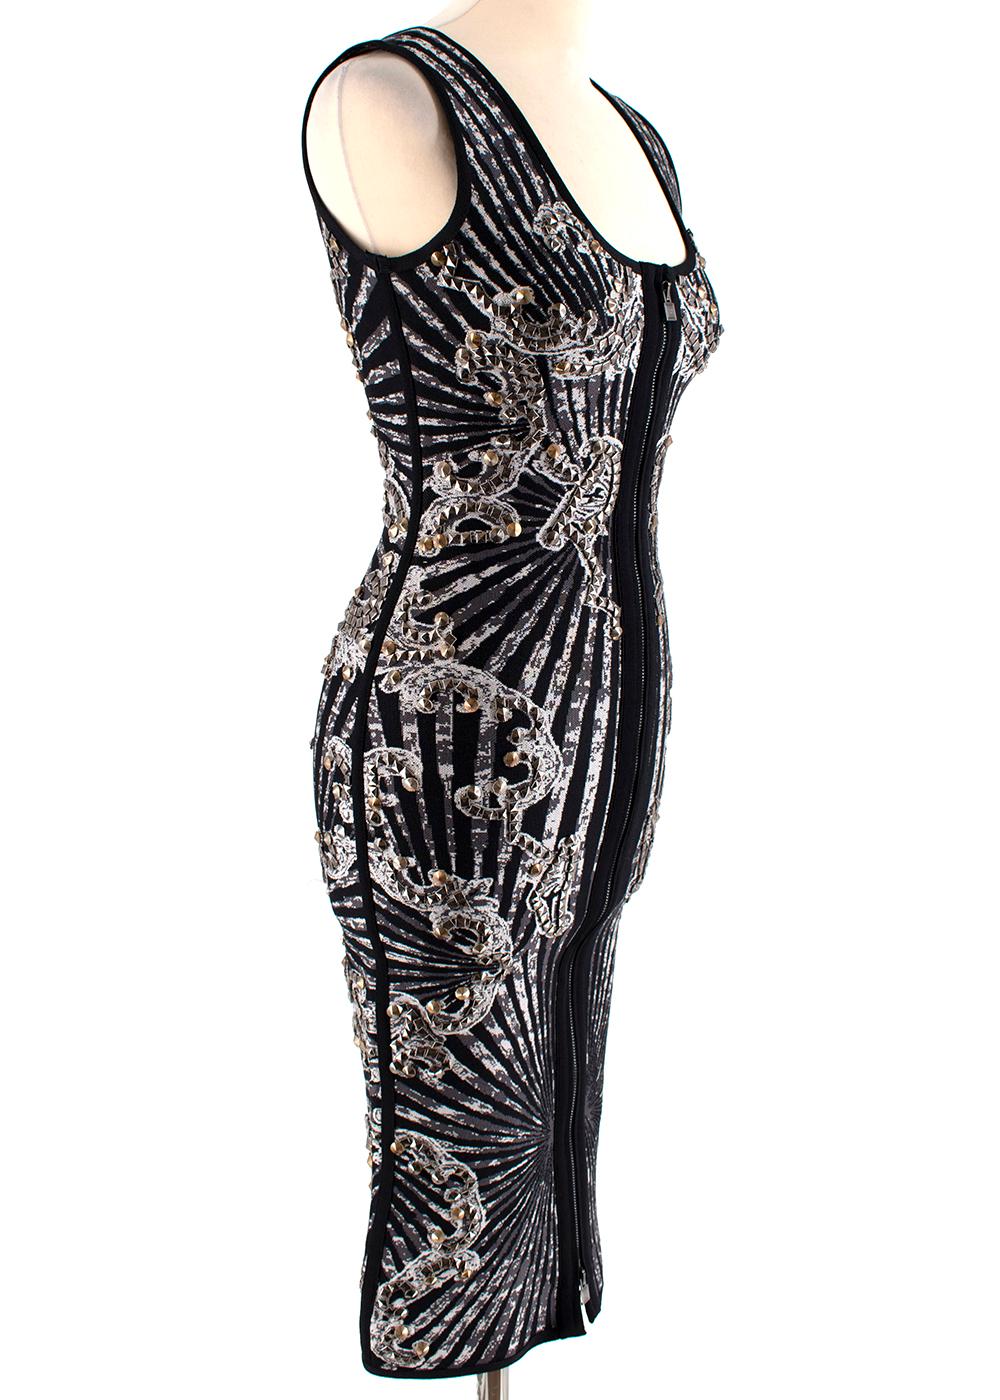 Herve Leger Black Studded Patterned Zip-Front Dress

- Silver and Gold Studded
- Heavy Material 
- Double Zip Fastening with Fish eye and hook
- Black boning contrast detail 


Material 
- 75% Rayon
- 23% Nylon
- 2% Spandex
Contrast
- 90% Rayon 
-